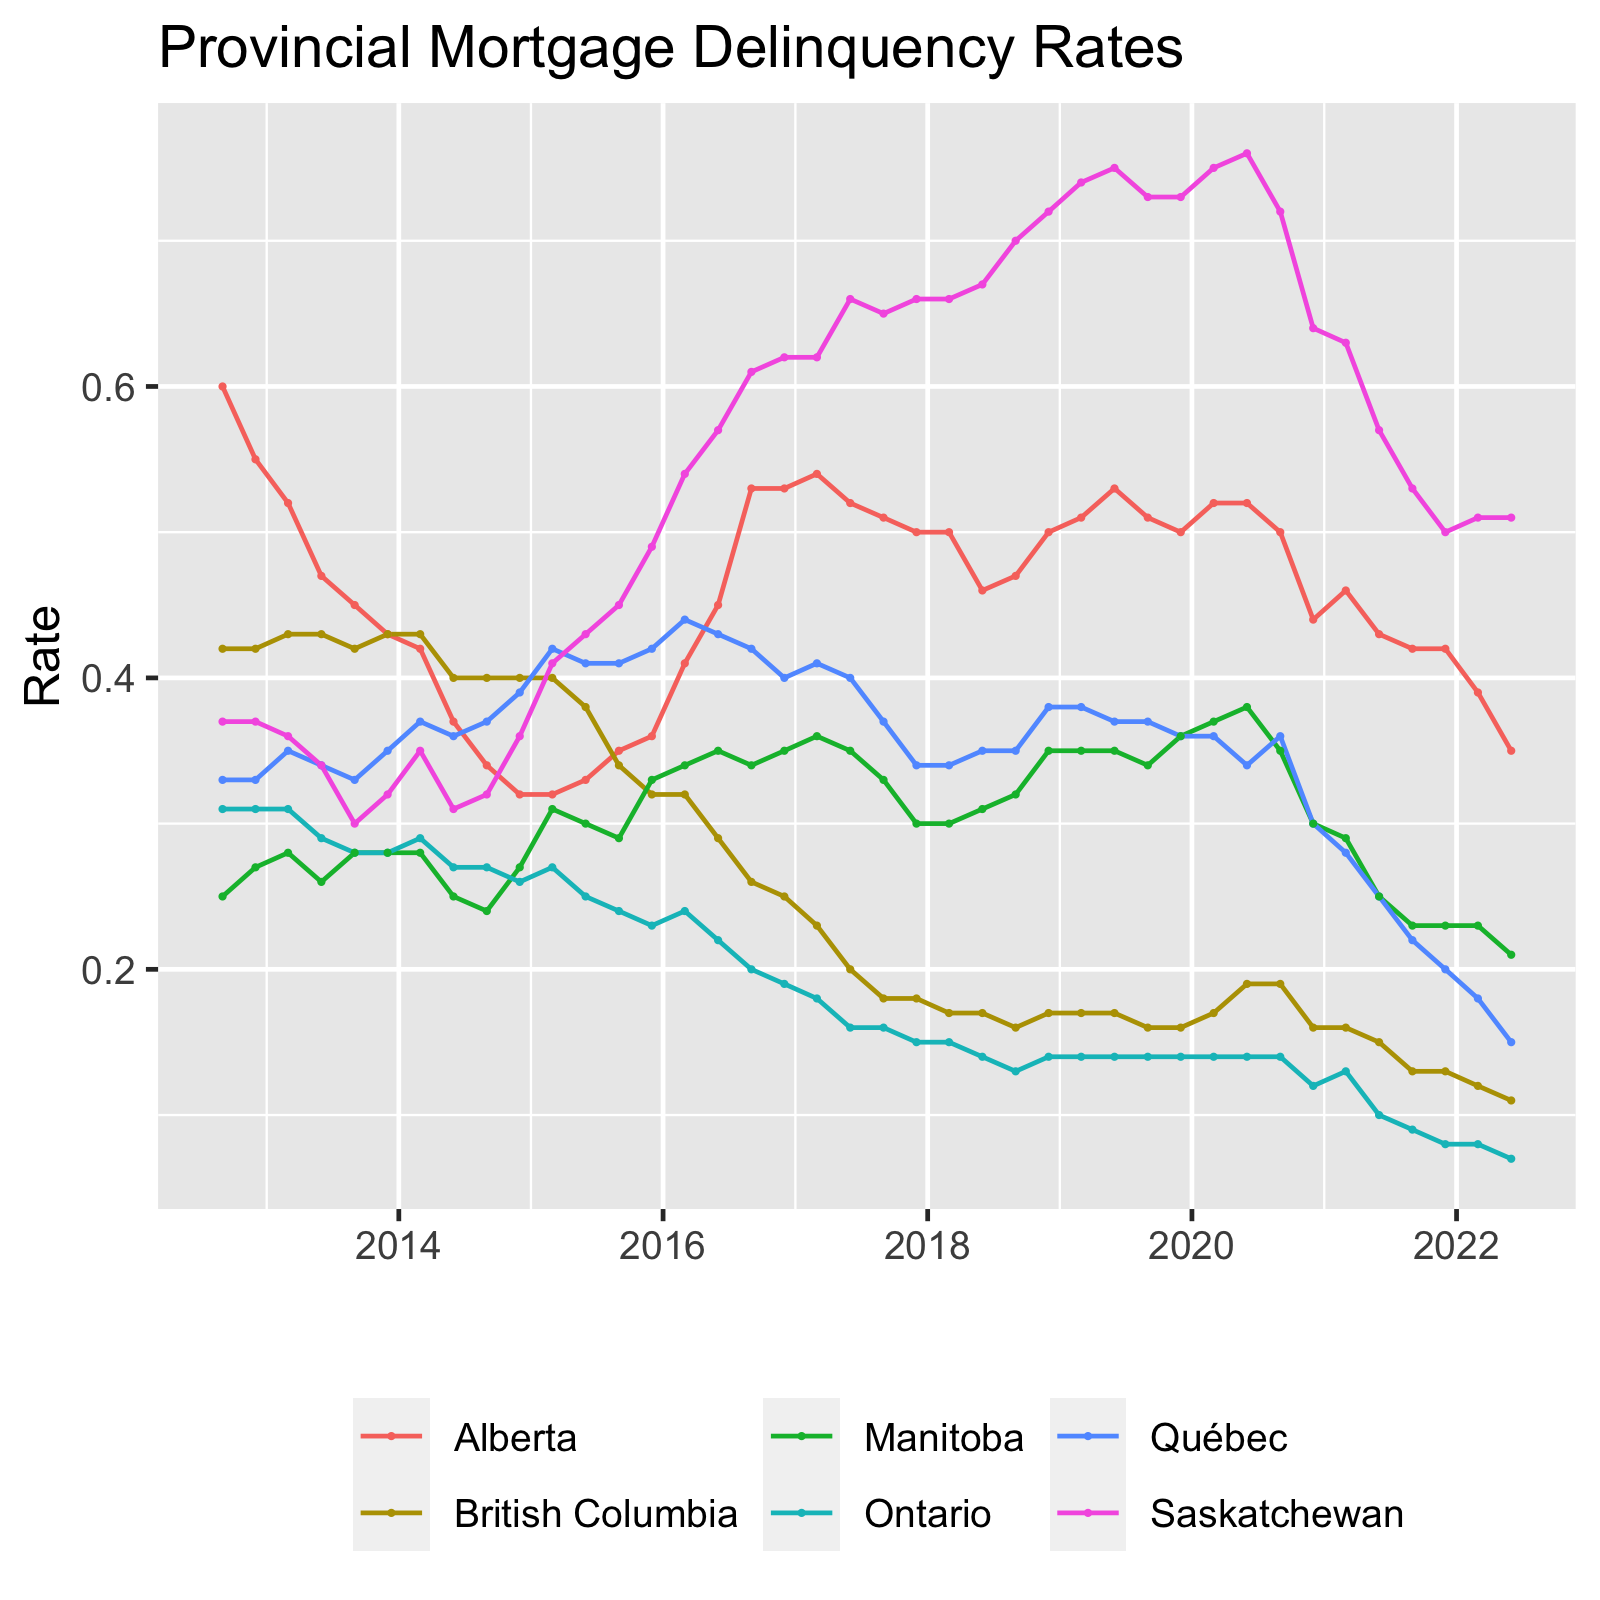 Line Chart showing Provincial Mortgage Delinquency Rates in Canada